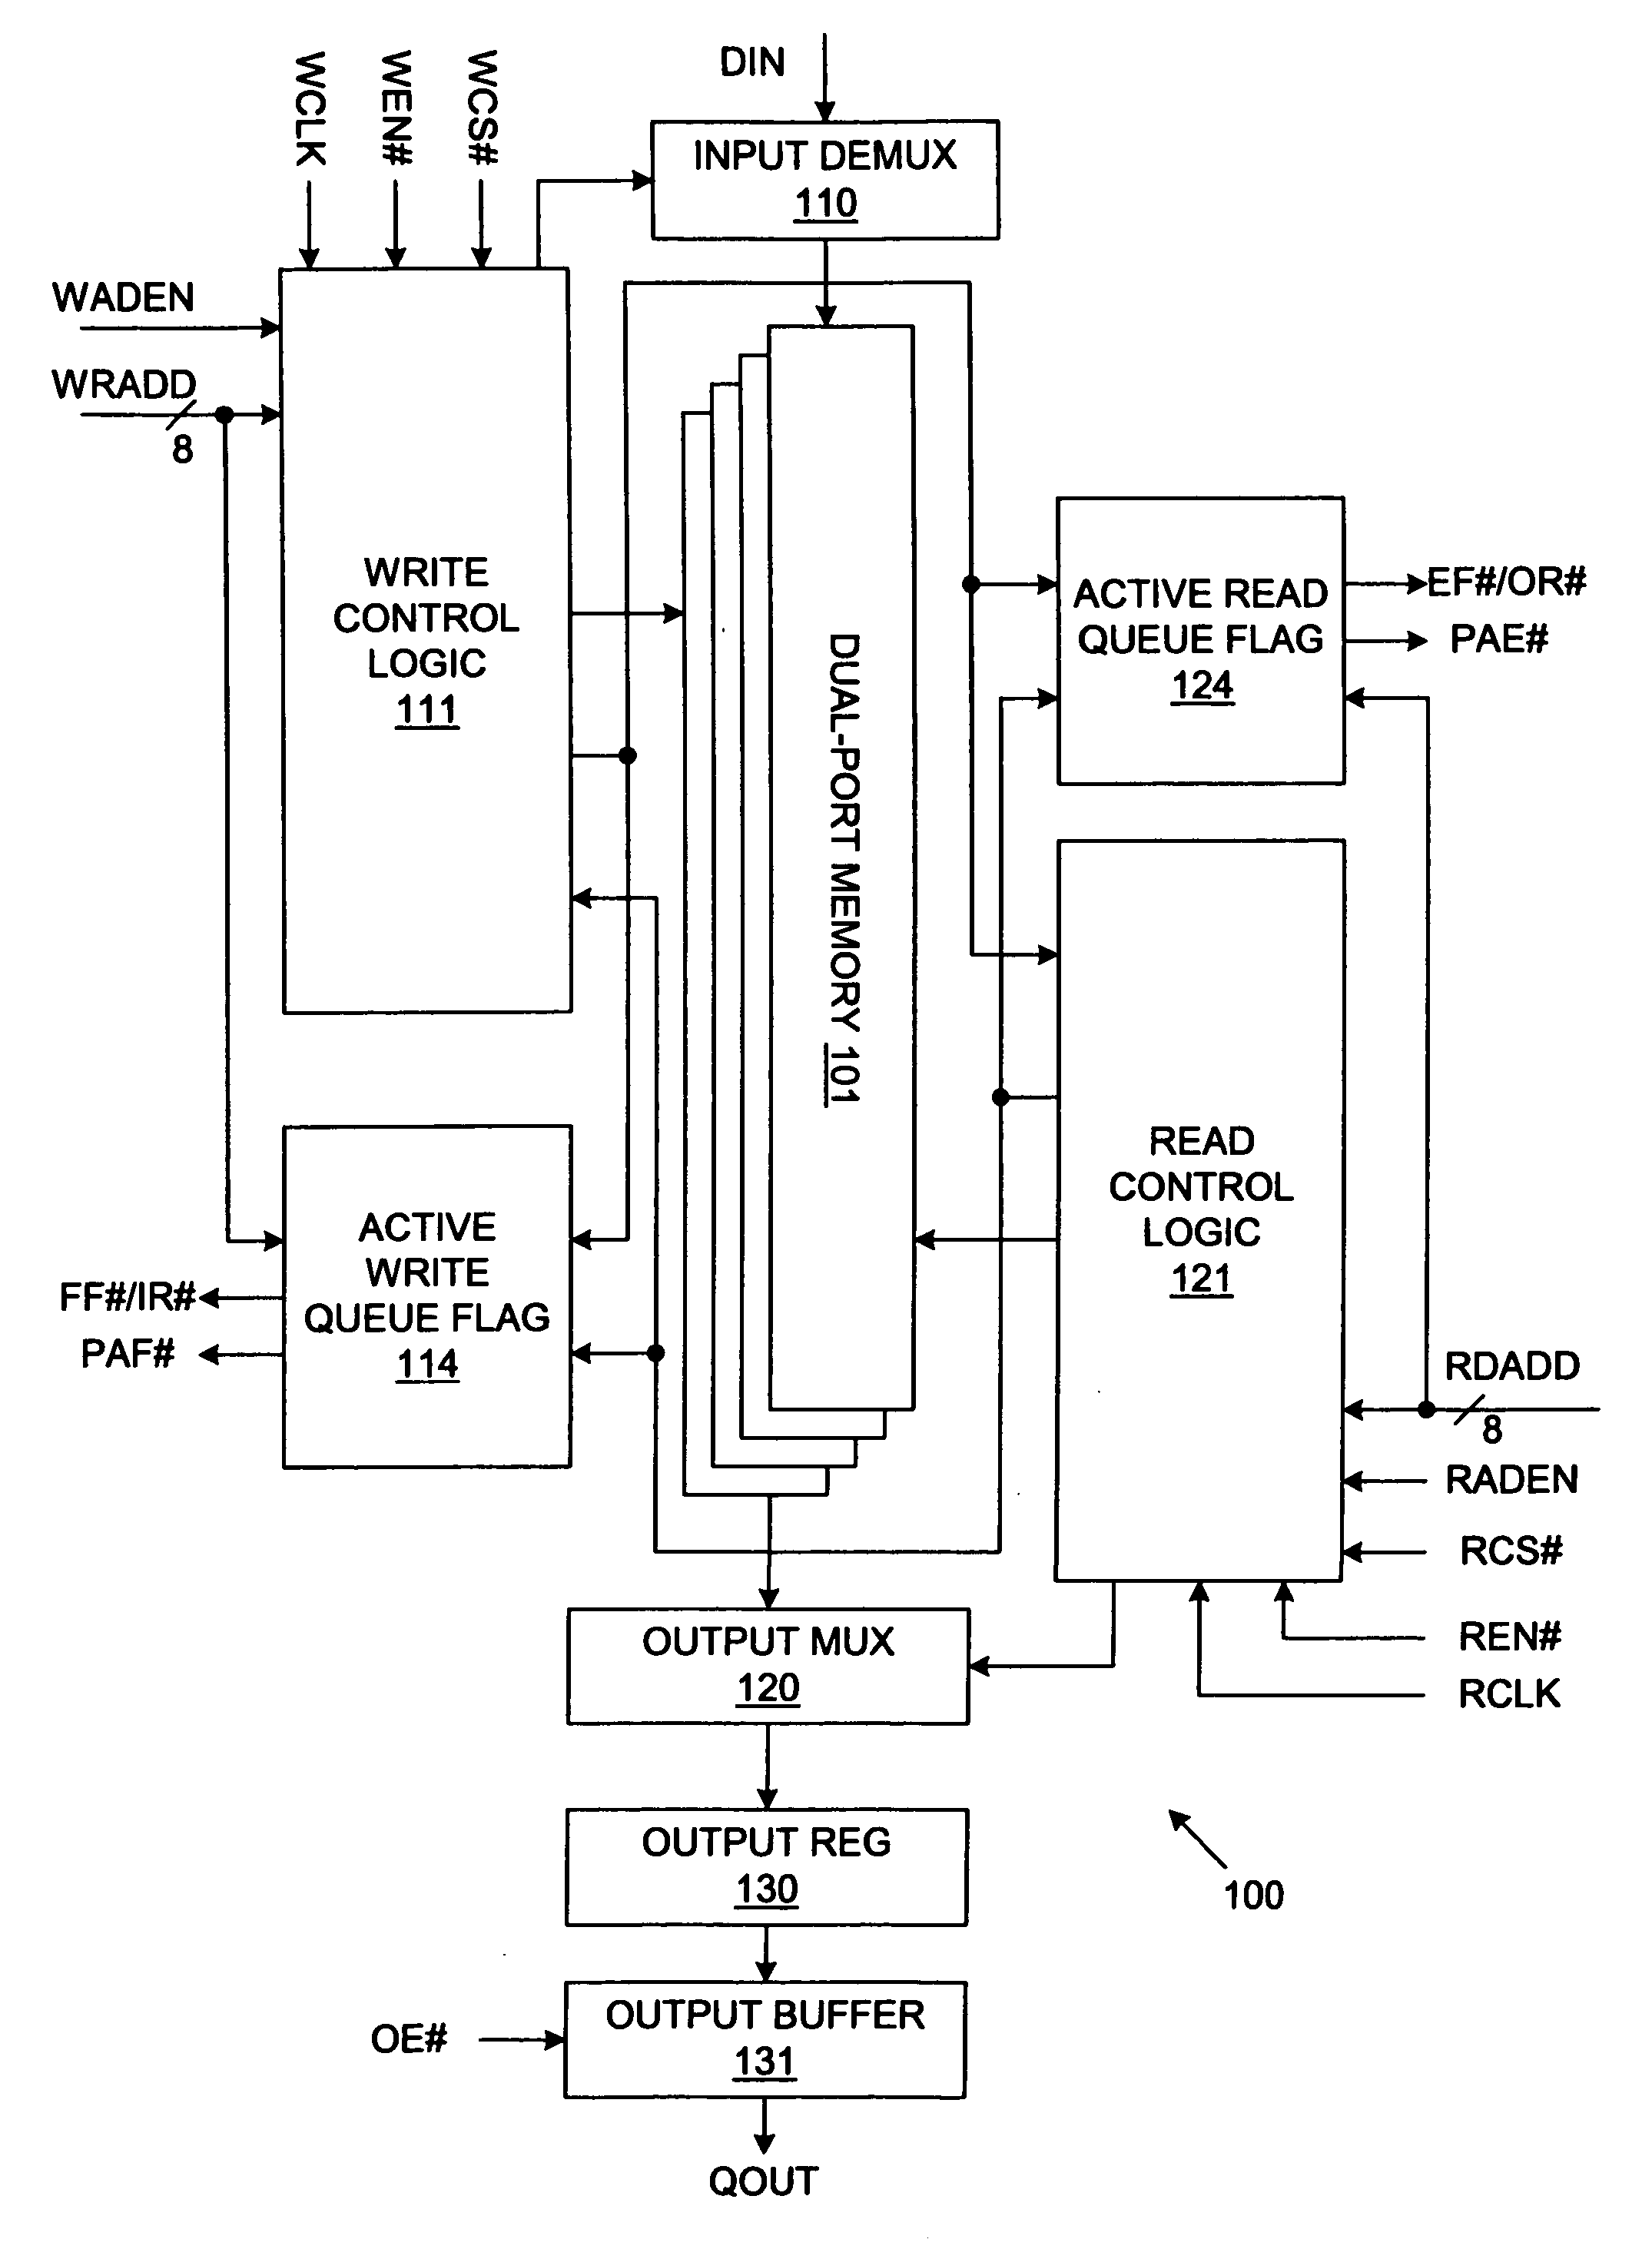 Partial packet read/write and data filtering in a multi-queue first-in first-out memory system